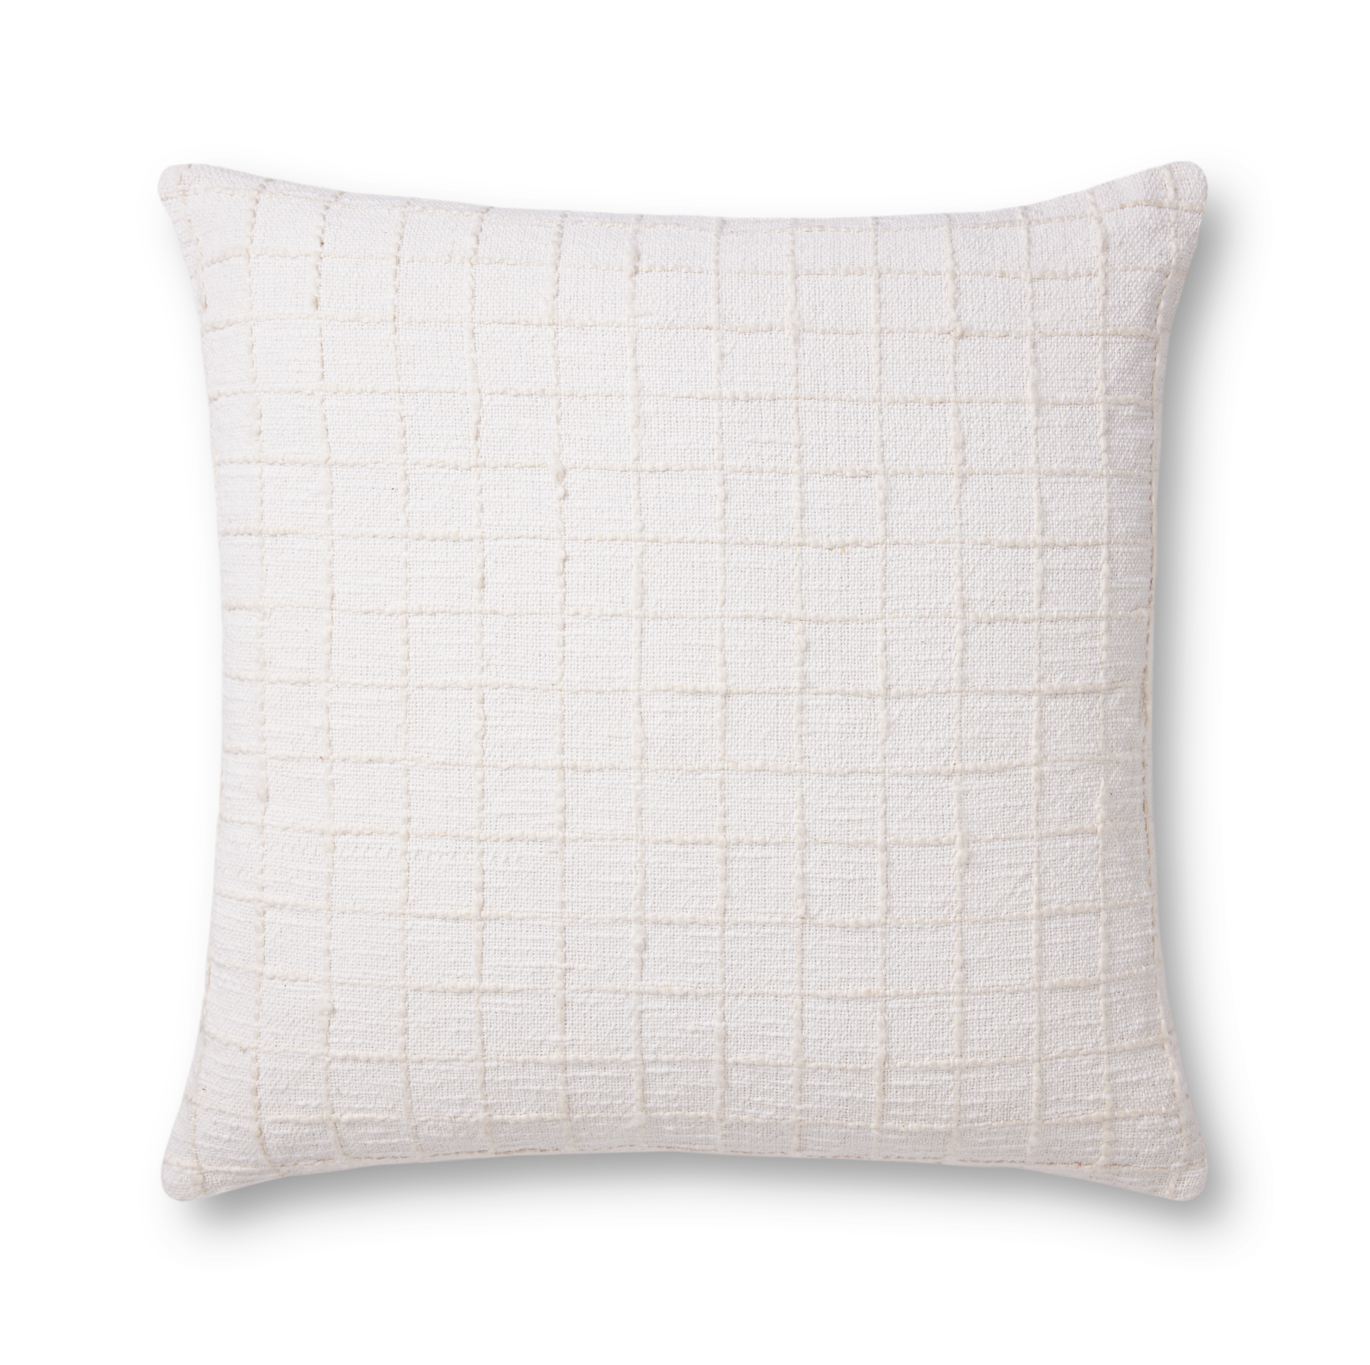 Mary Pillow $99.00